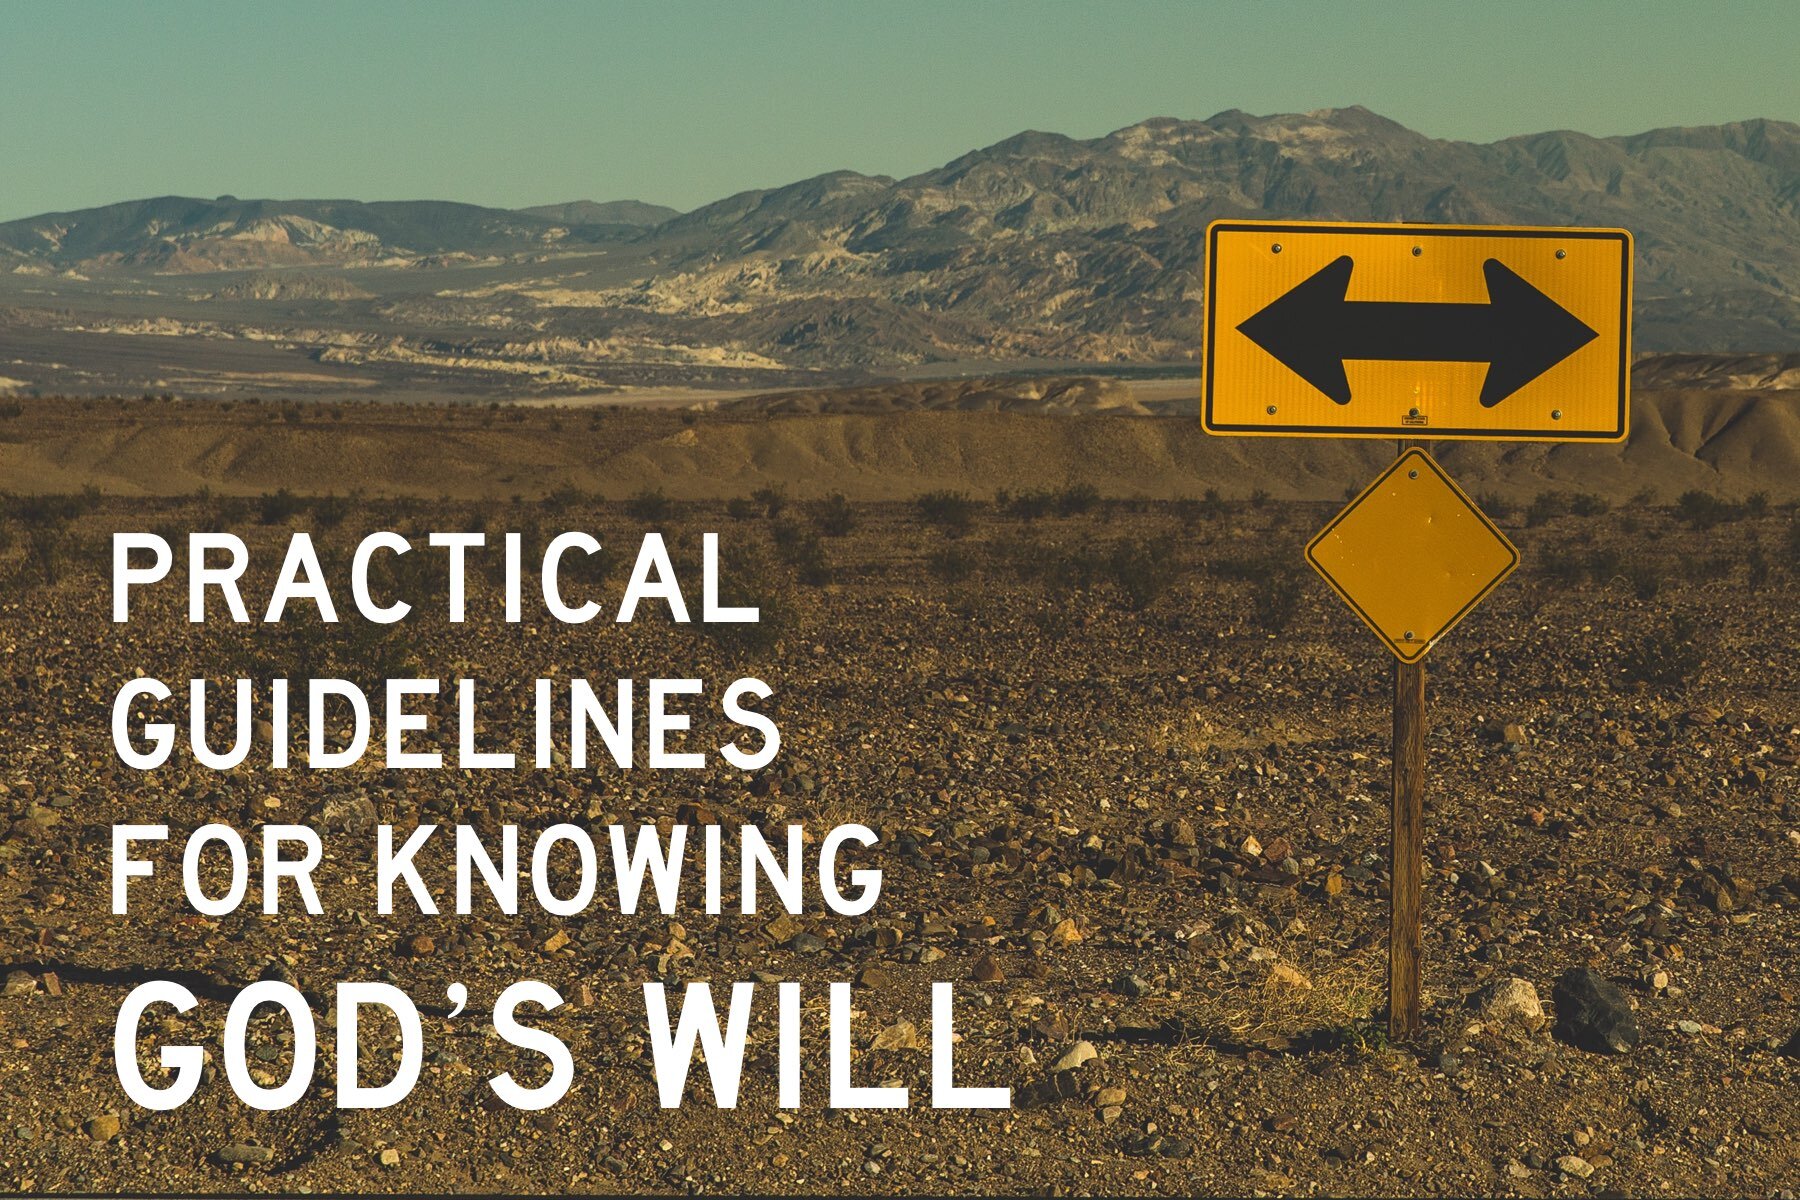 Practical Guidelines for Knowing God's Will